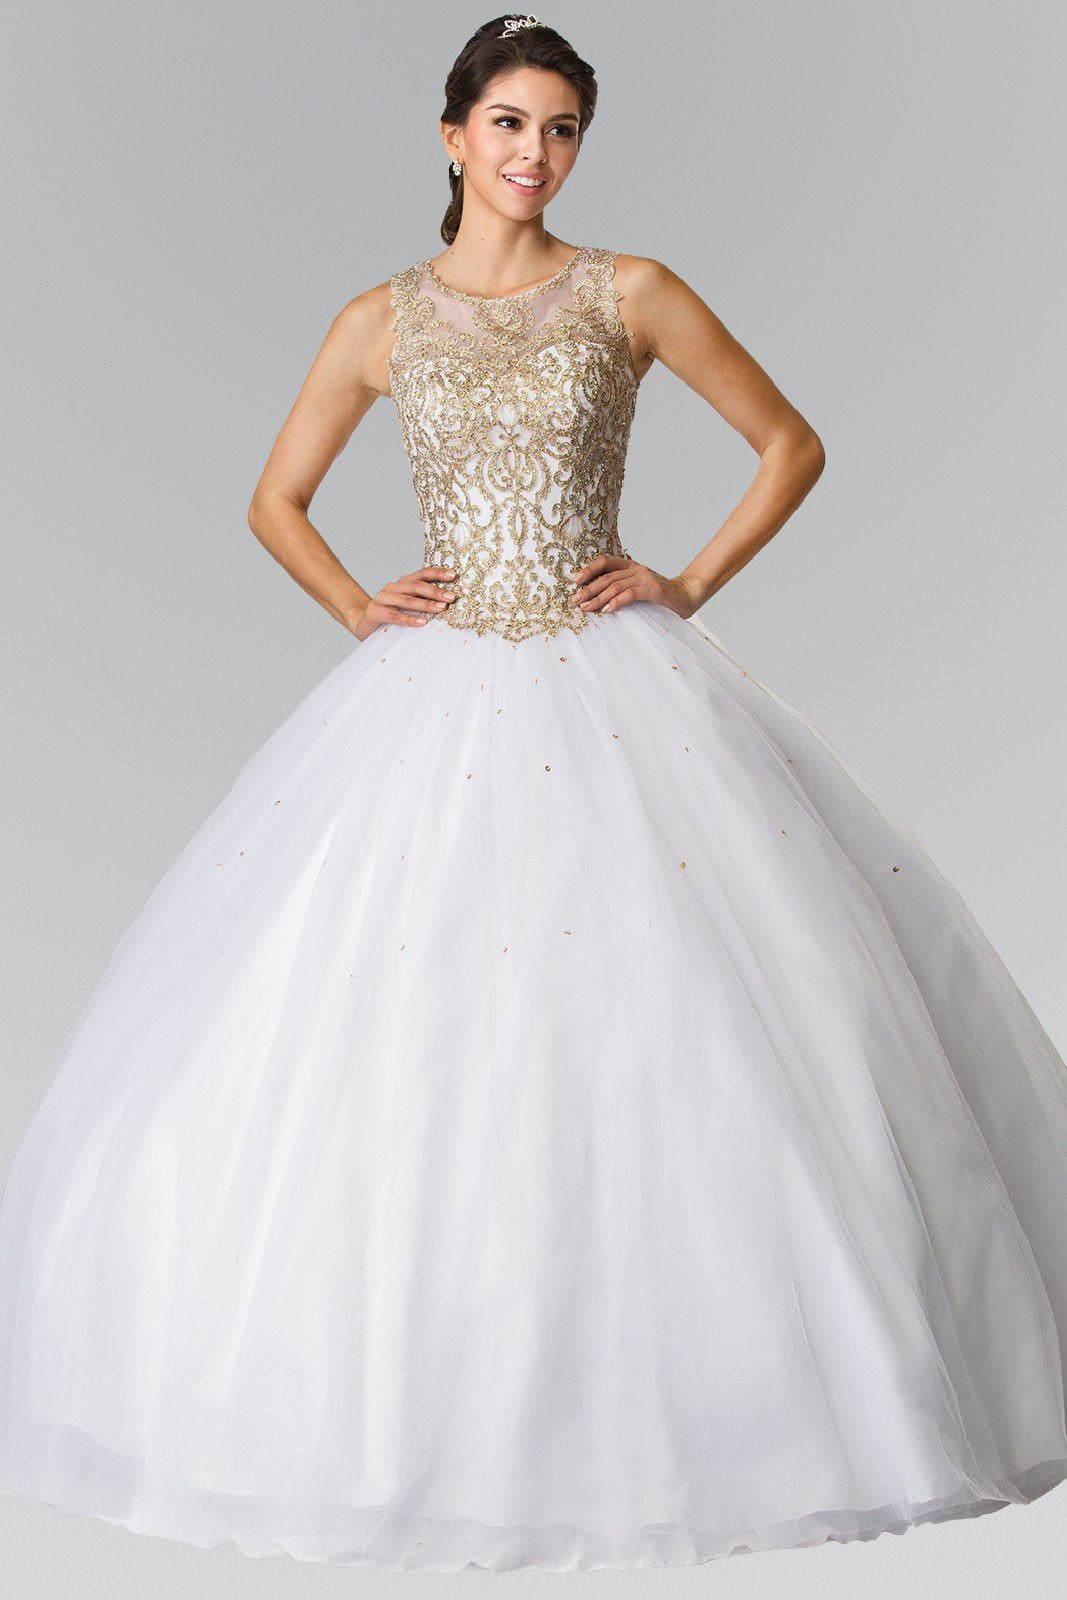 white and gold sweet 16 dress